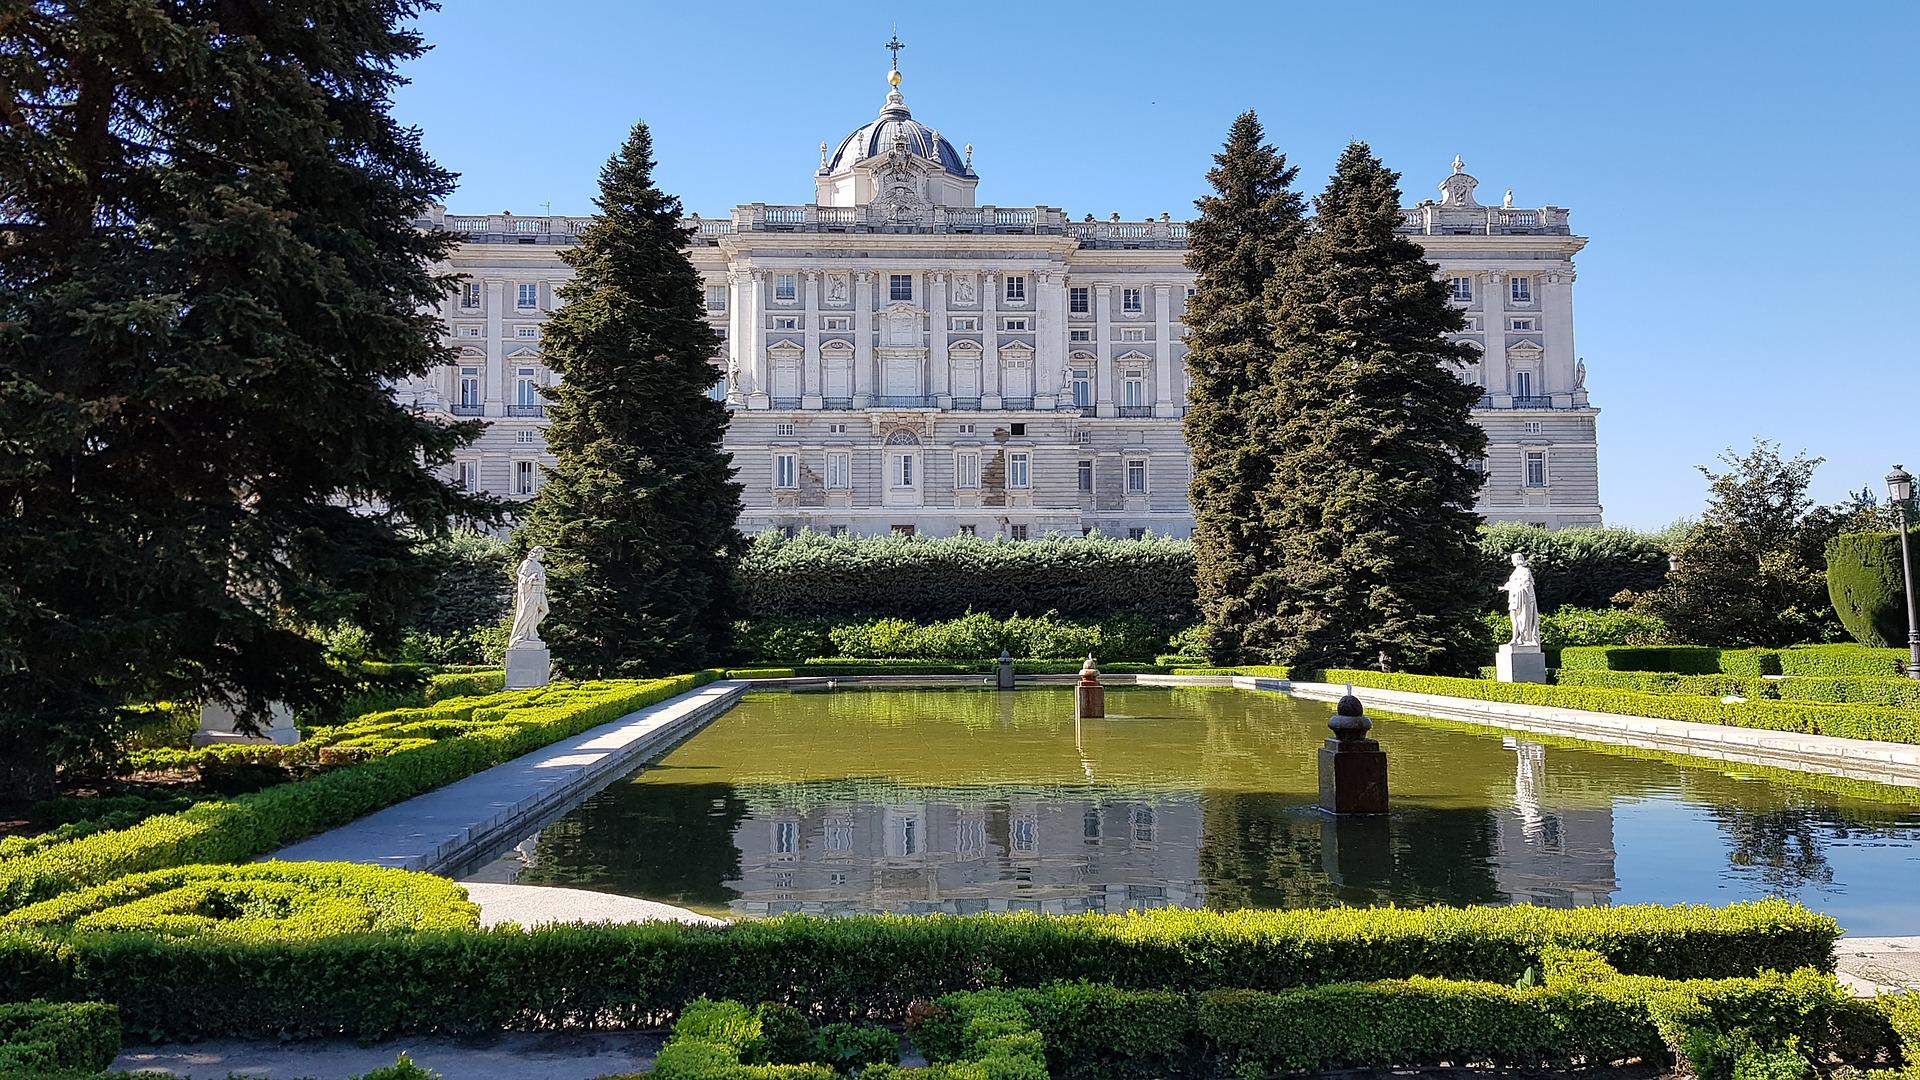 Madrid: Royal Palace and Almudena Cathedral